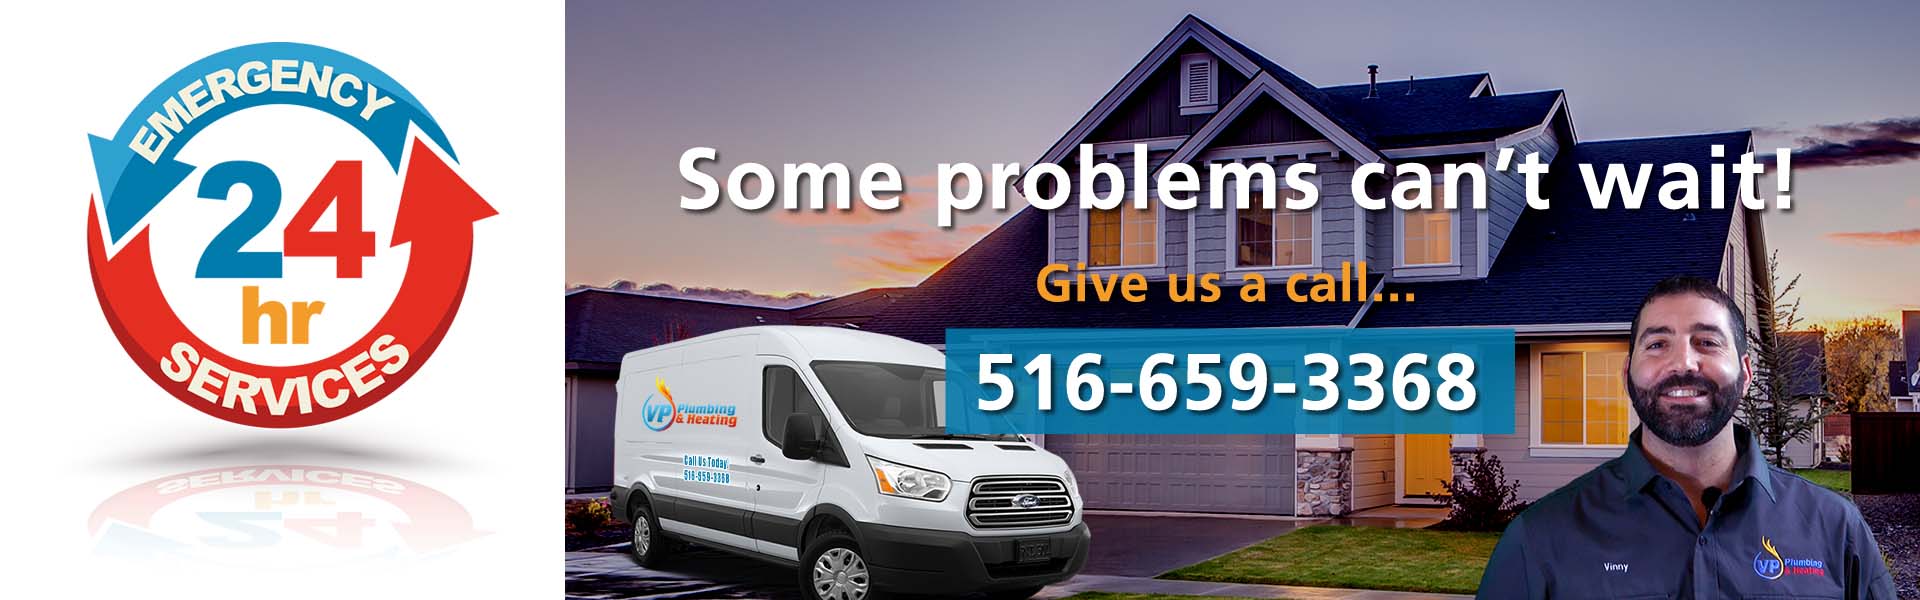 Emergency Heating & HVAC Services in Suffolk County, NY